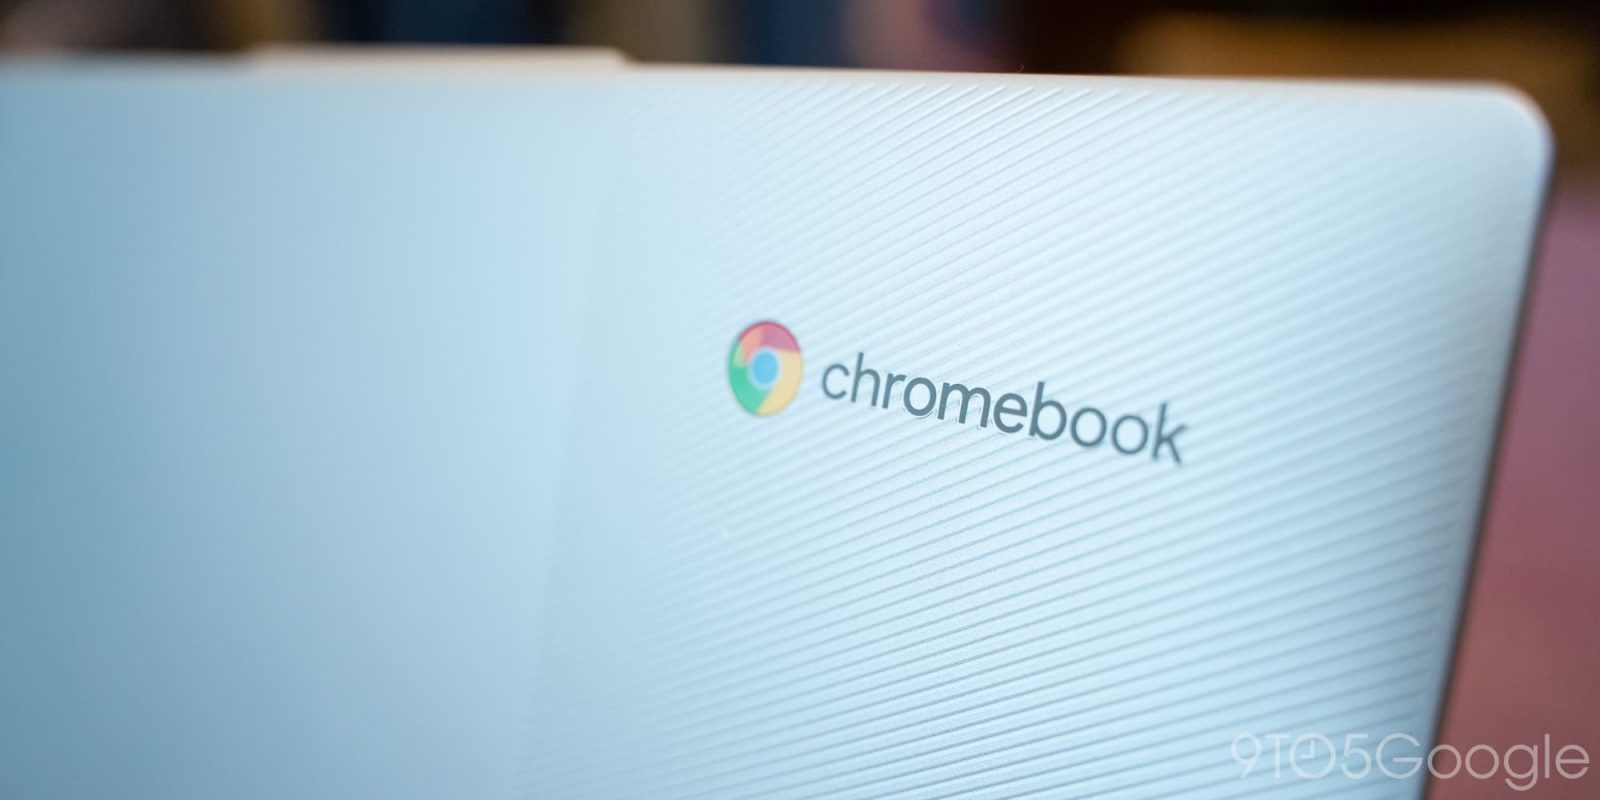 Google Features Select 'Premium' Games for Chromebooks